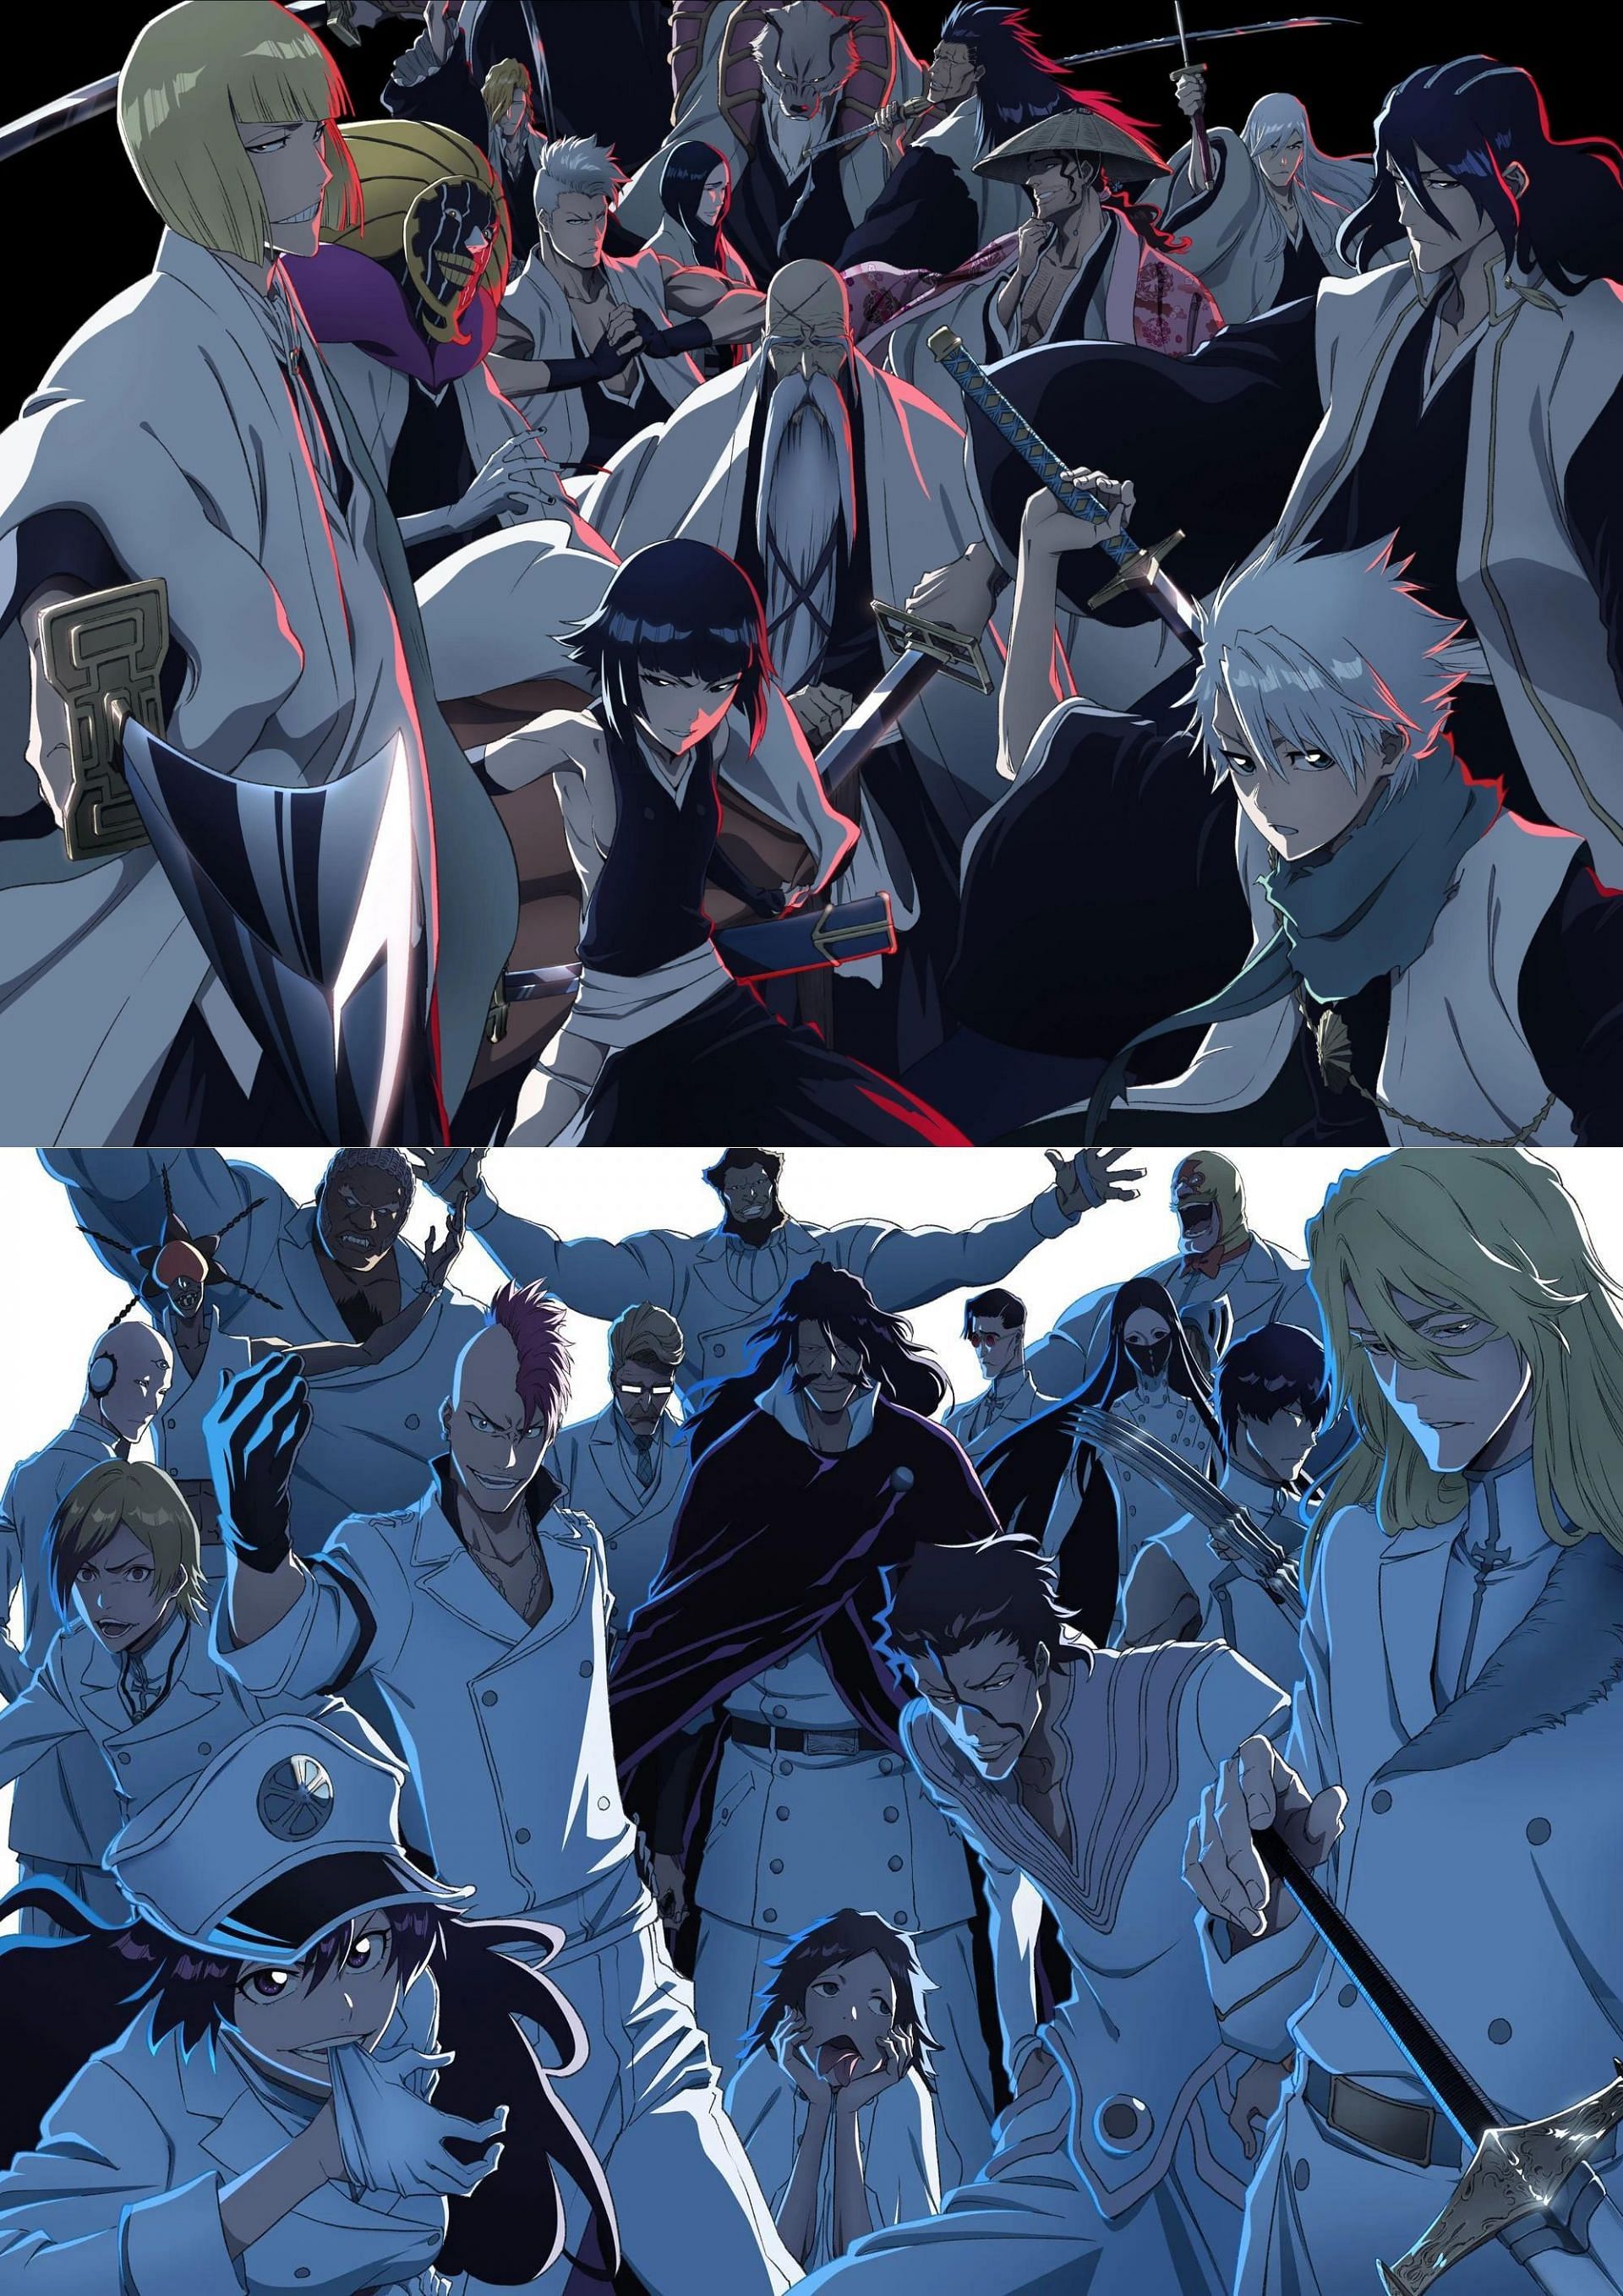 Gotei 13 captains and Sternritter in Bleach TYBW key visuals (Image via Studio Pierrot)